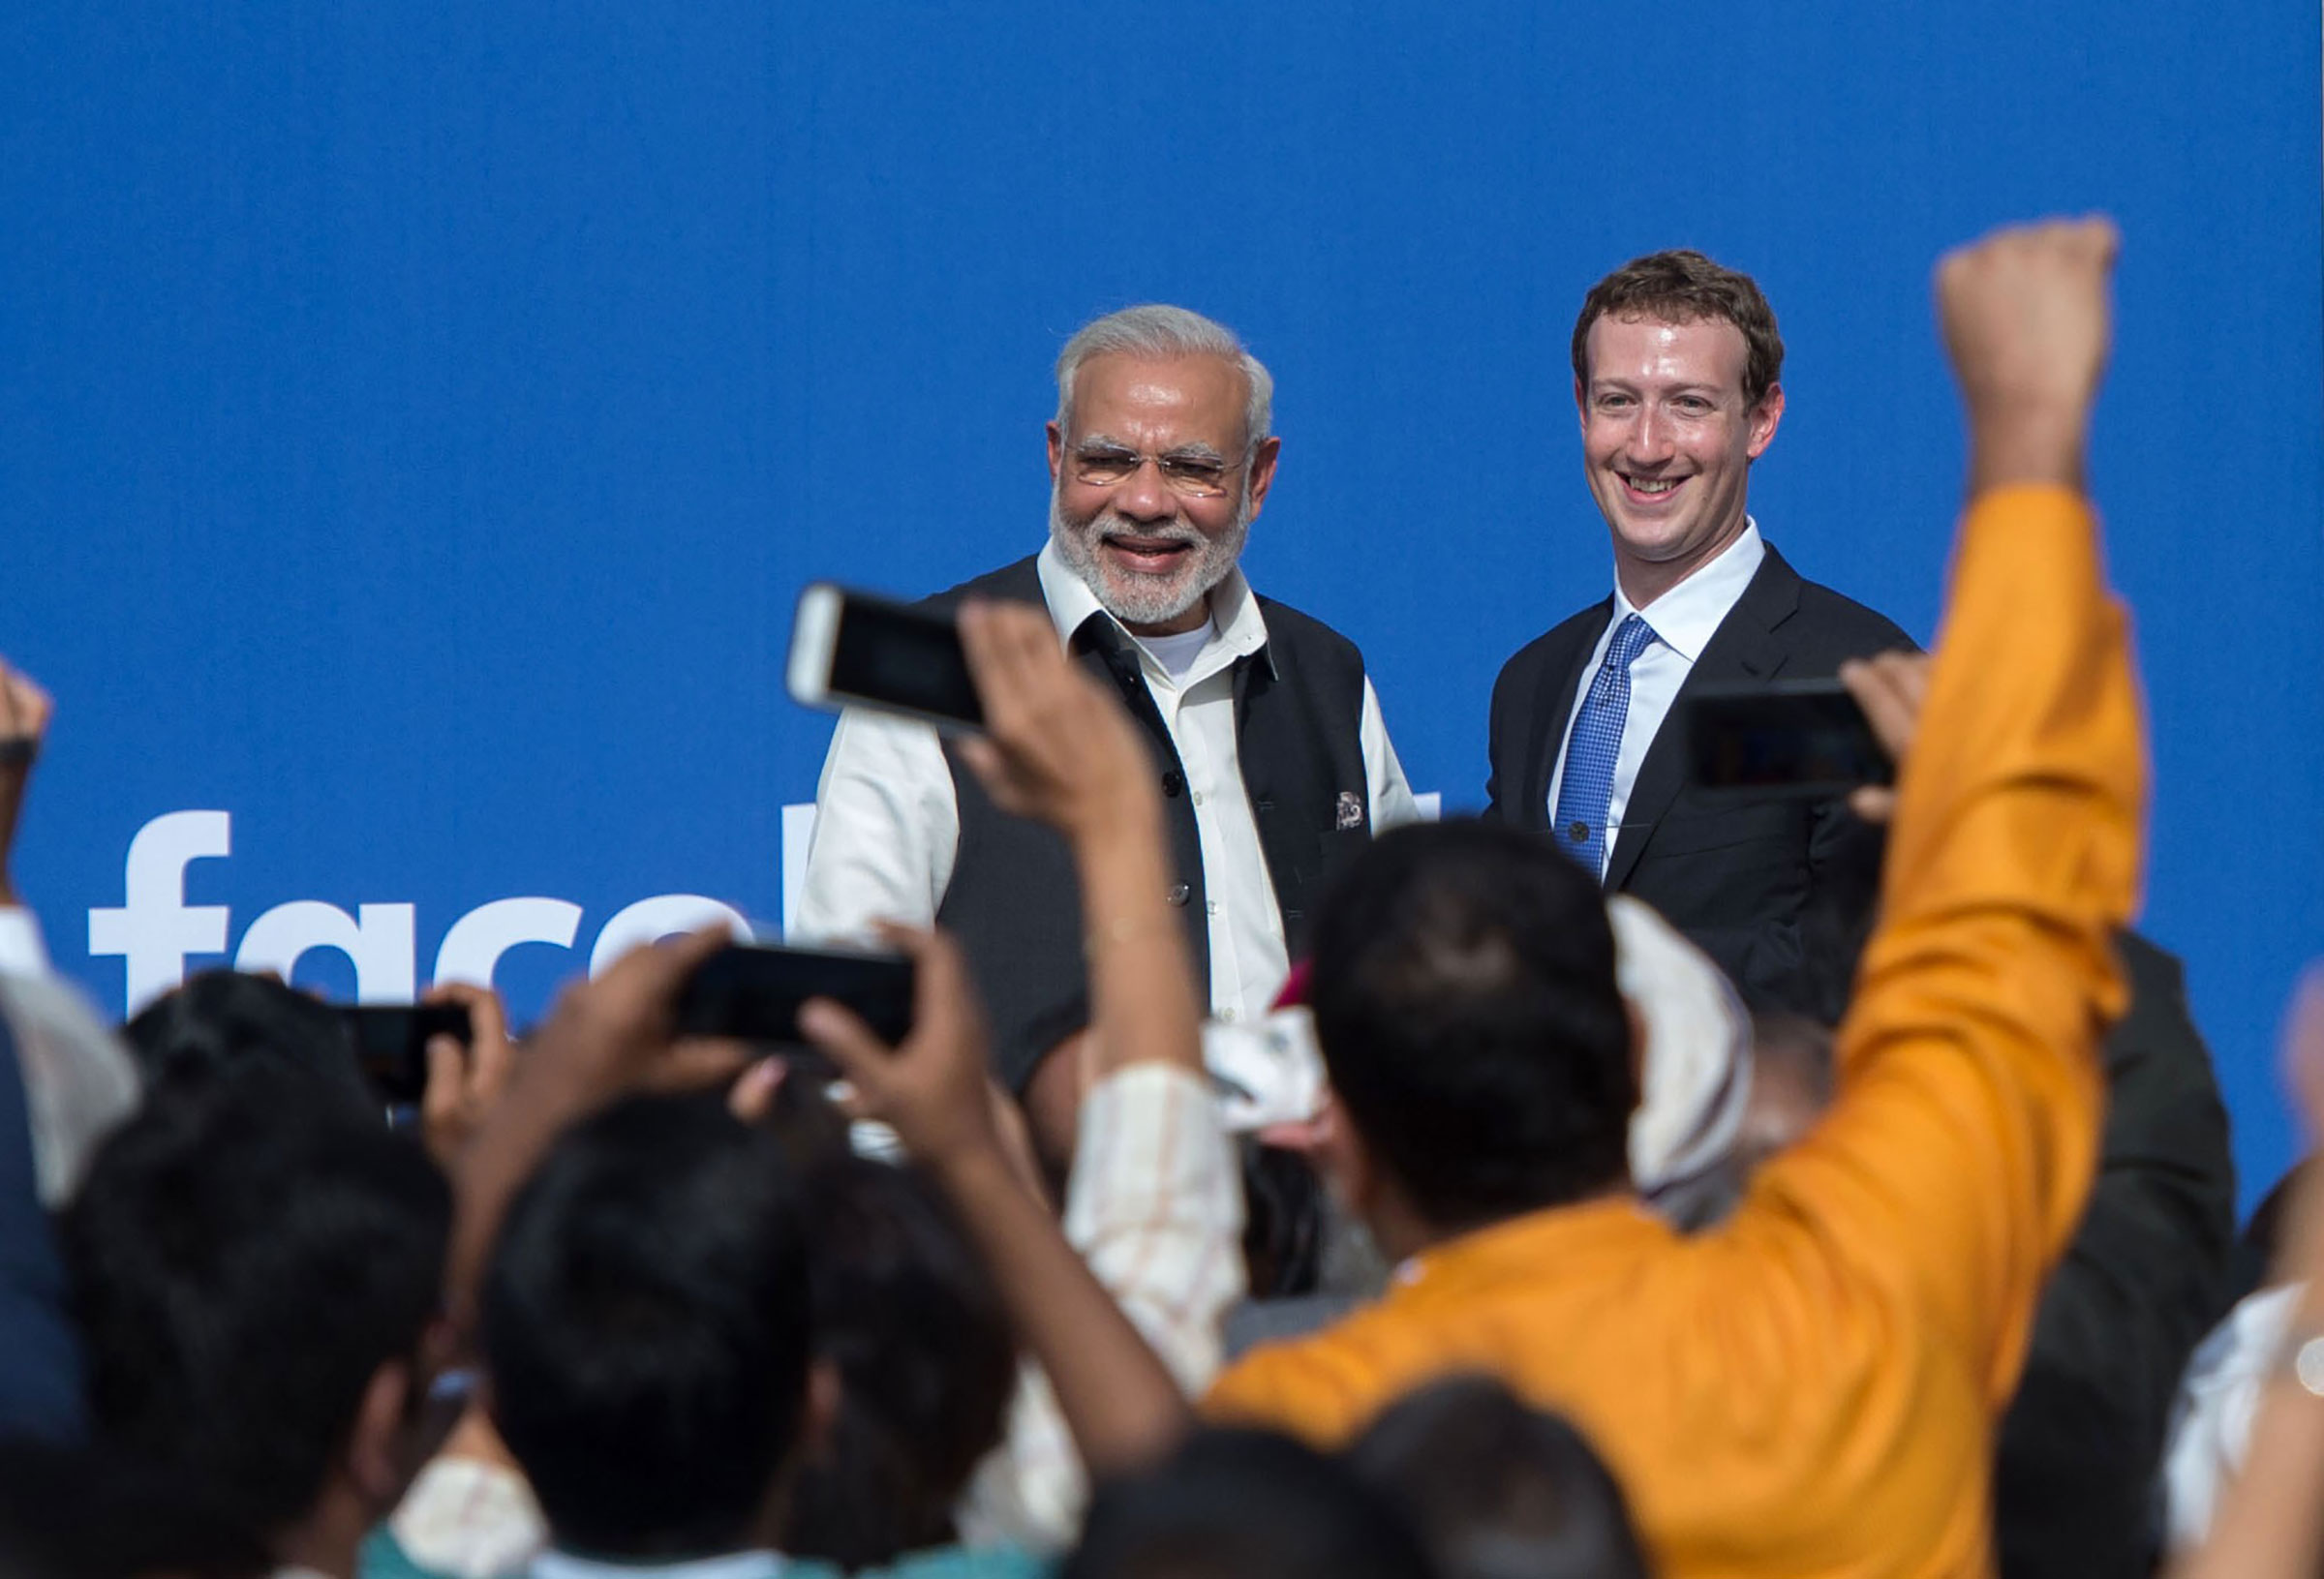 Indian Prime Minister Narendra Modi and Facebook CEO Mark Zuckerberg attend a meeting at Facebook headquarters in Menlo Park, California, on September 27, 2015. (Susana Bates—AFP/Getty Images)